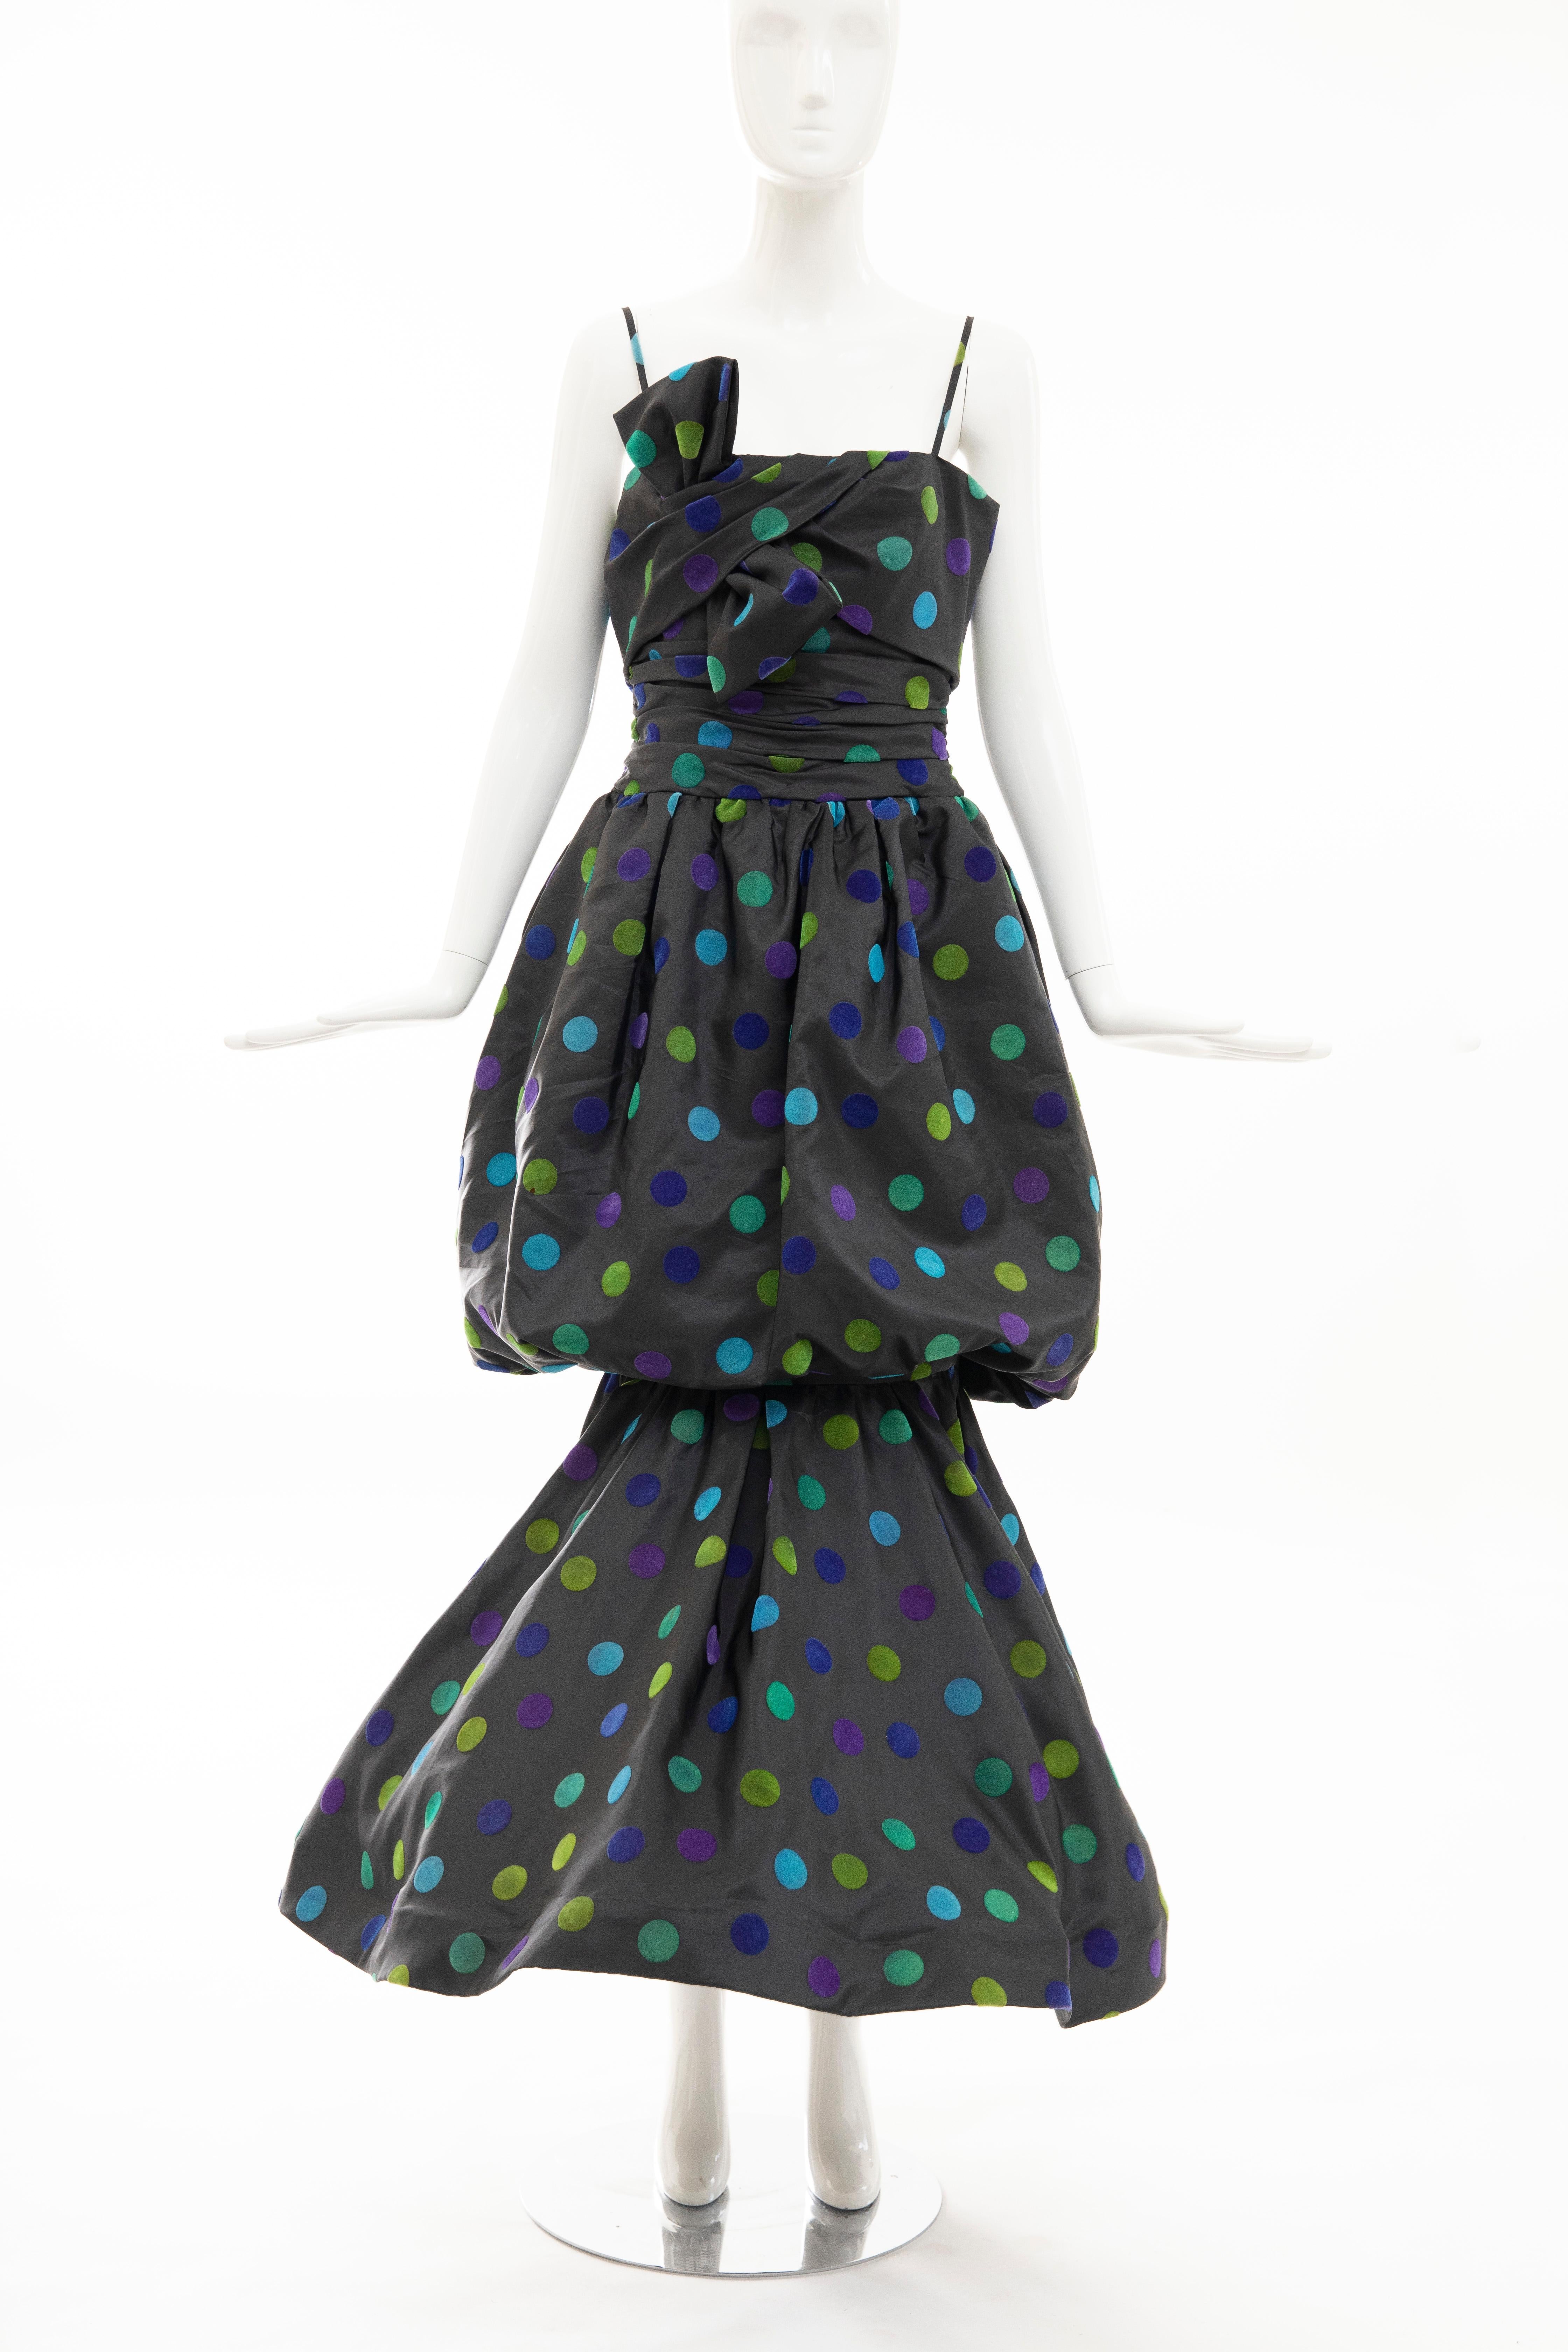 Nina Ricci, Circa: 1980's bow front spaghetti strap taffeta velveteen dots evening dress with shirred waist, trumpet skirt with back zip and hook-and-eye and fully lined in silk.

EU.44, US. 8

Bust: 28, Waist: 30, Hips: 54, Length: 57